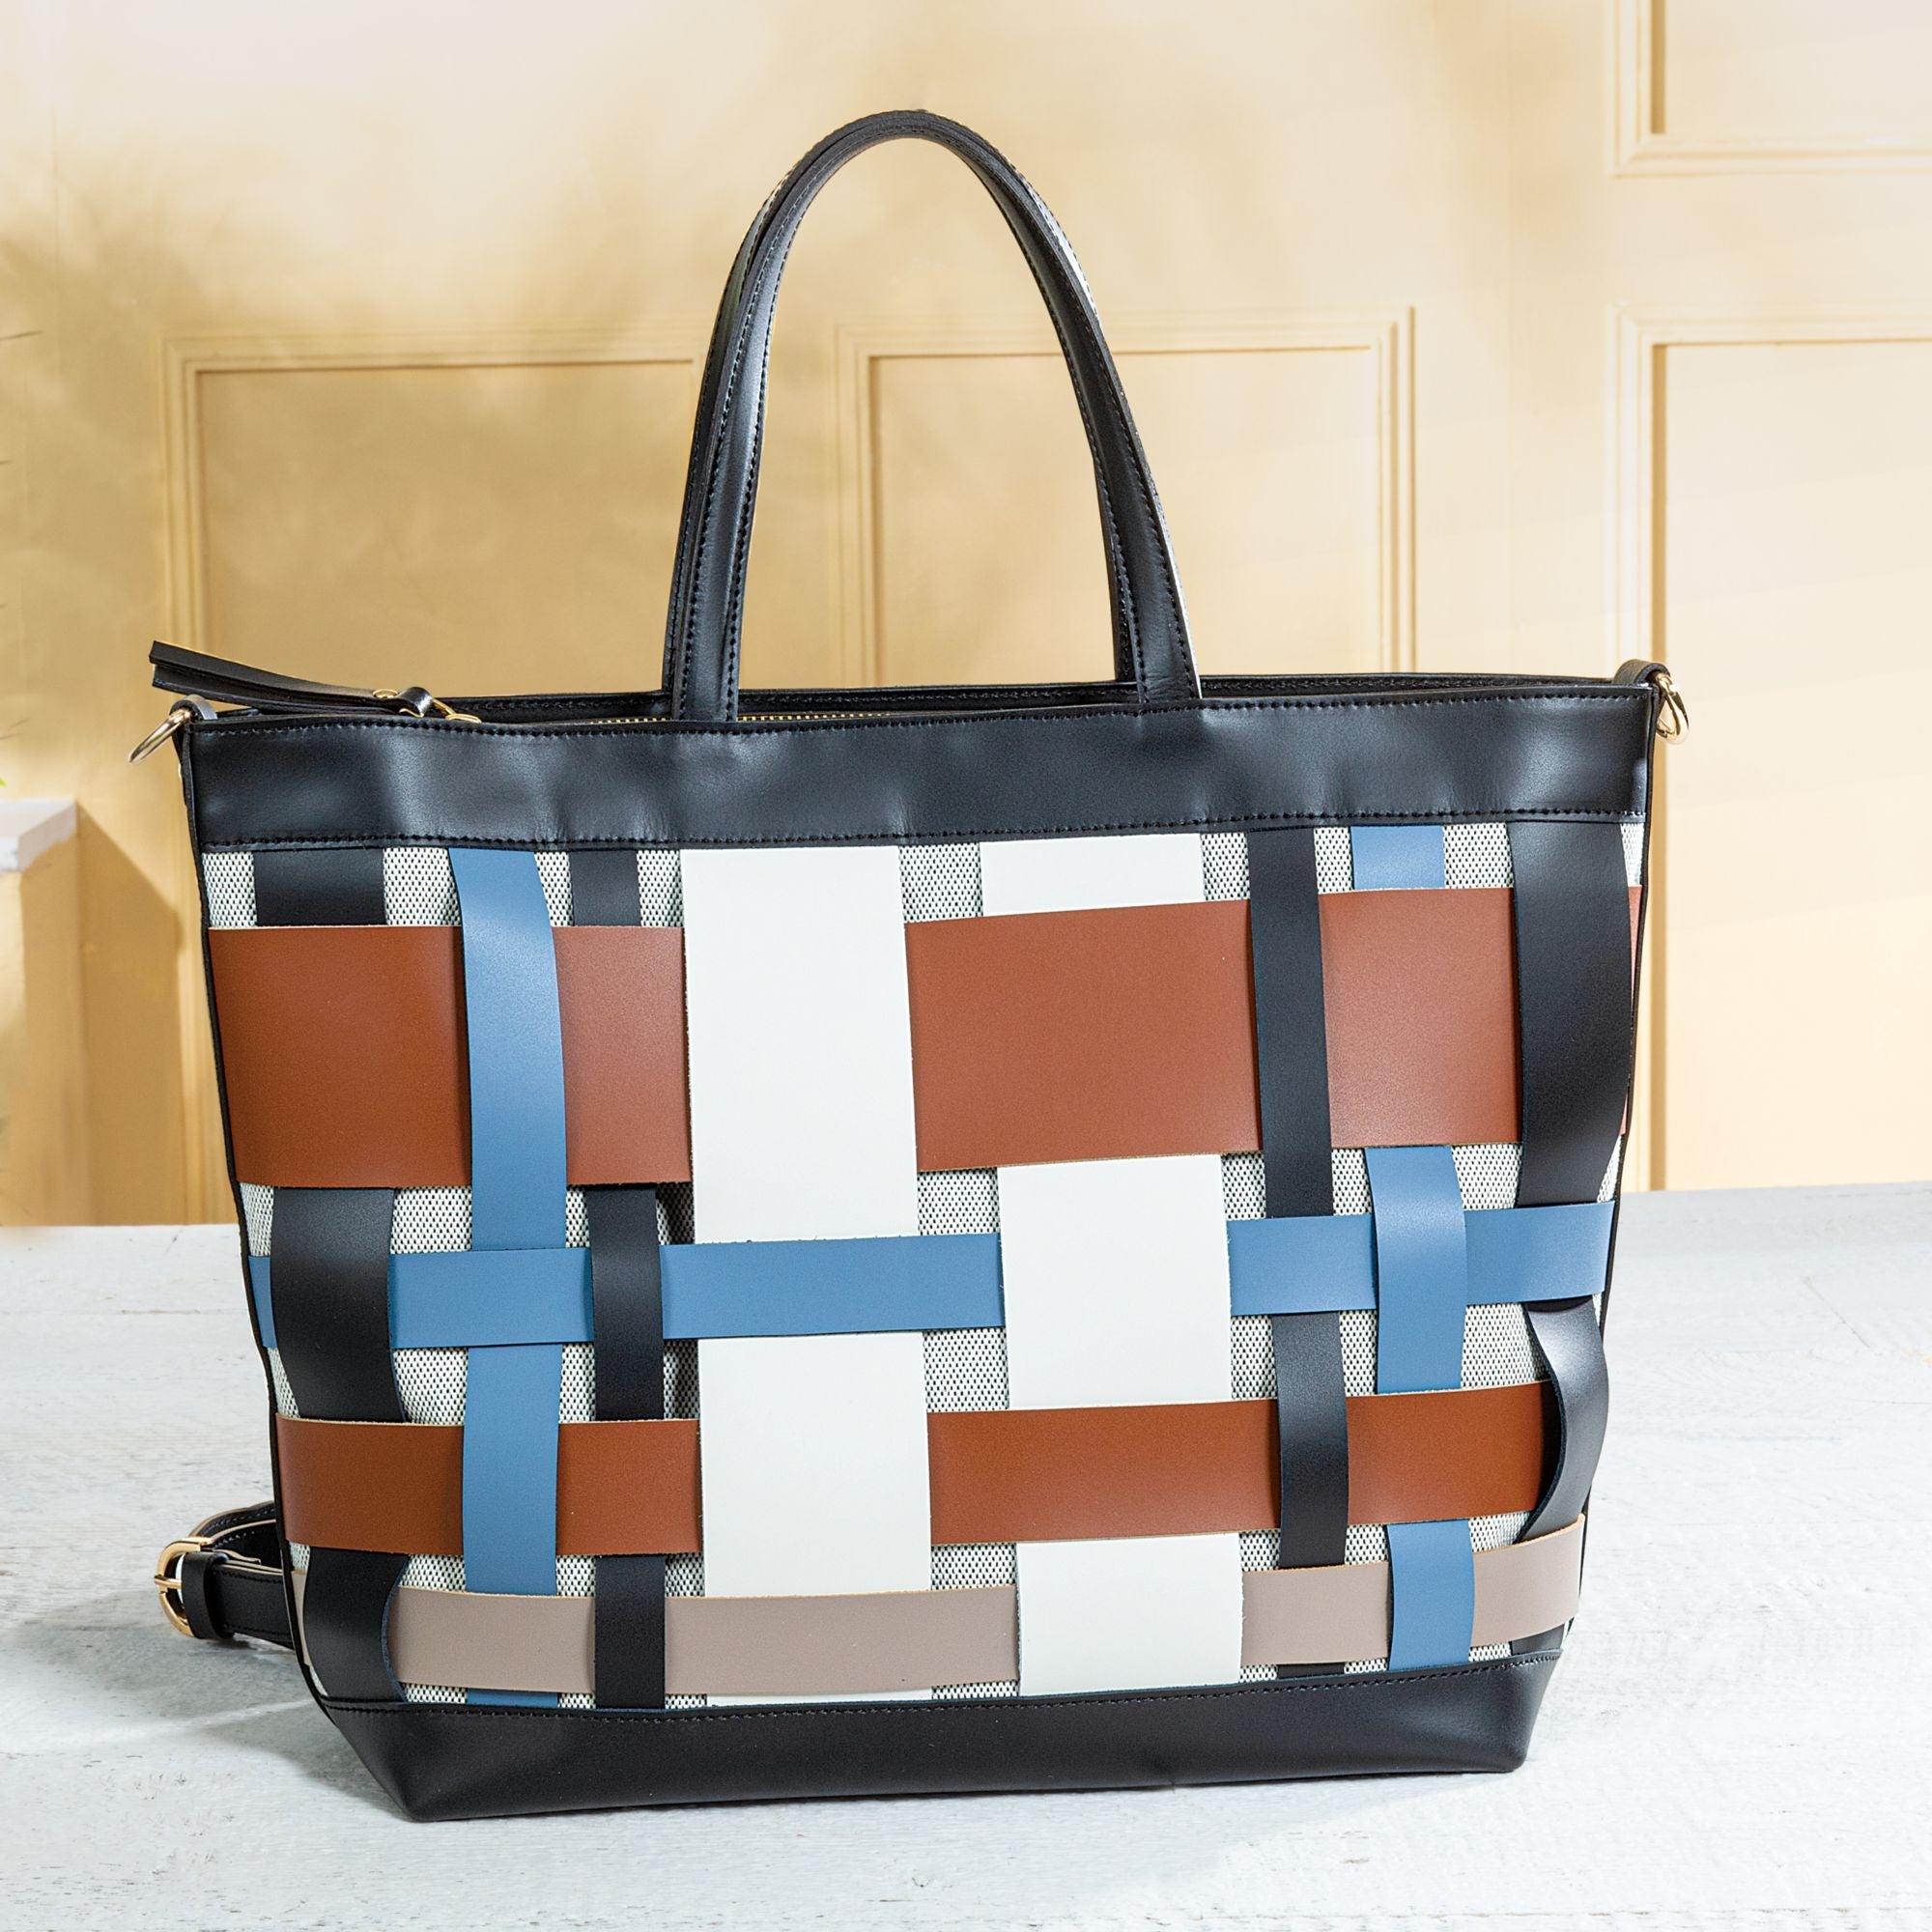 Arianna Woven Leather Tote Bag